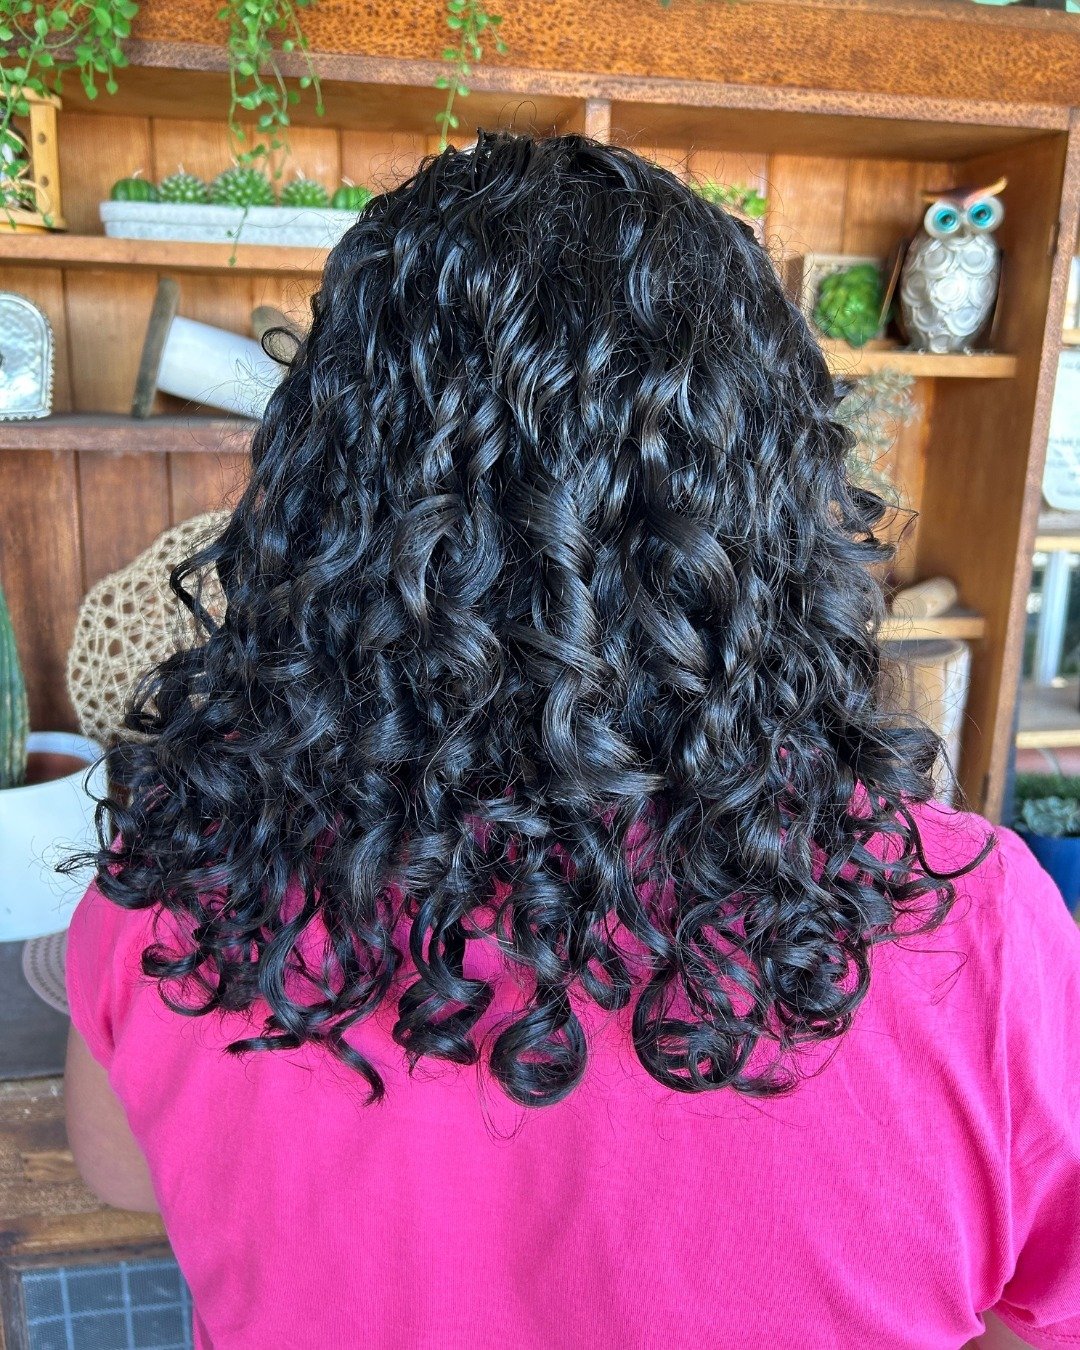 healthy curls are happy curls 😍🤍⁠
⁠
a beautiful curly cut and wash by lily. our team of curl specialists at organic ministry are here to care for your curls.⁠
⁠
#adelaidecurls #curlyhairmagic #adelaidehairstylist #curlsinadelaide #curlyhairgoal #ad